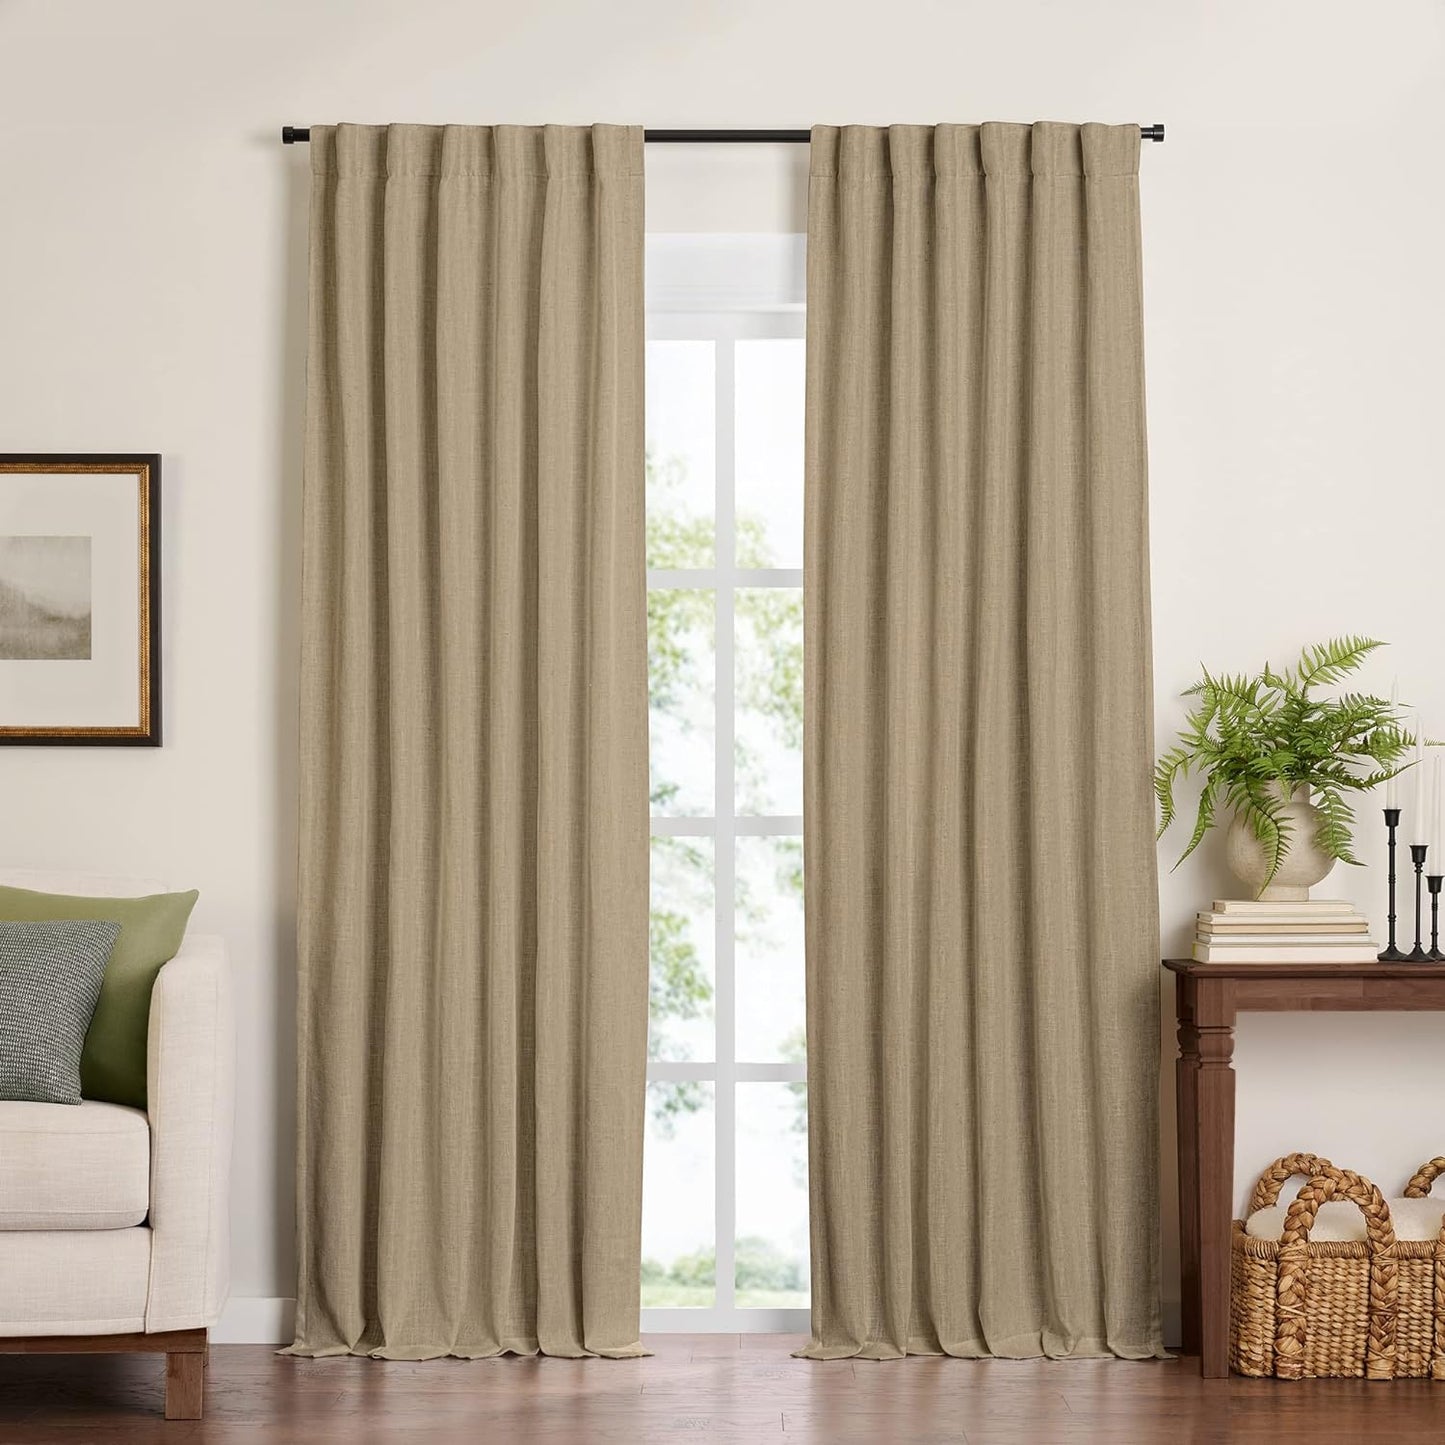 Elrene Home Fashions Harrow Solid Texture Blackout Single Window Curtain Panel, 52"X84", Natural  Elrene Home Fashions Linen 52"X84" (1 Panel) 